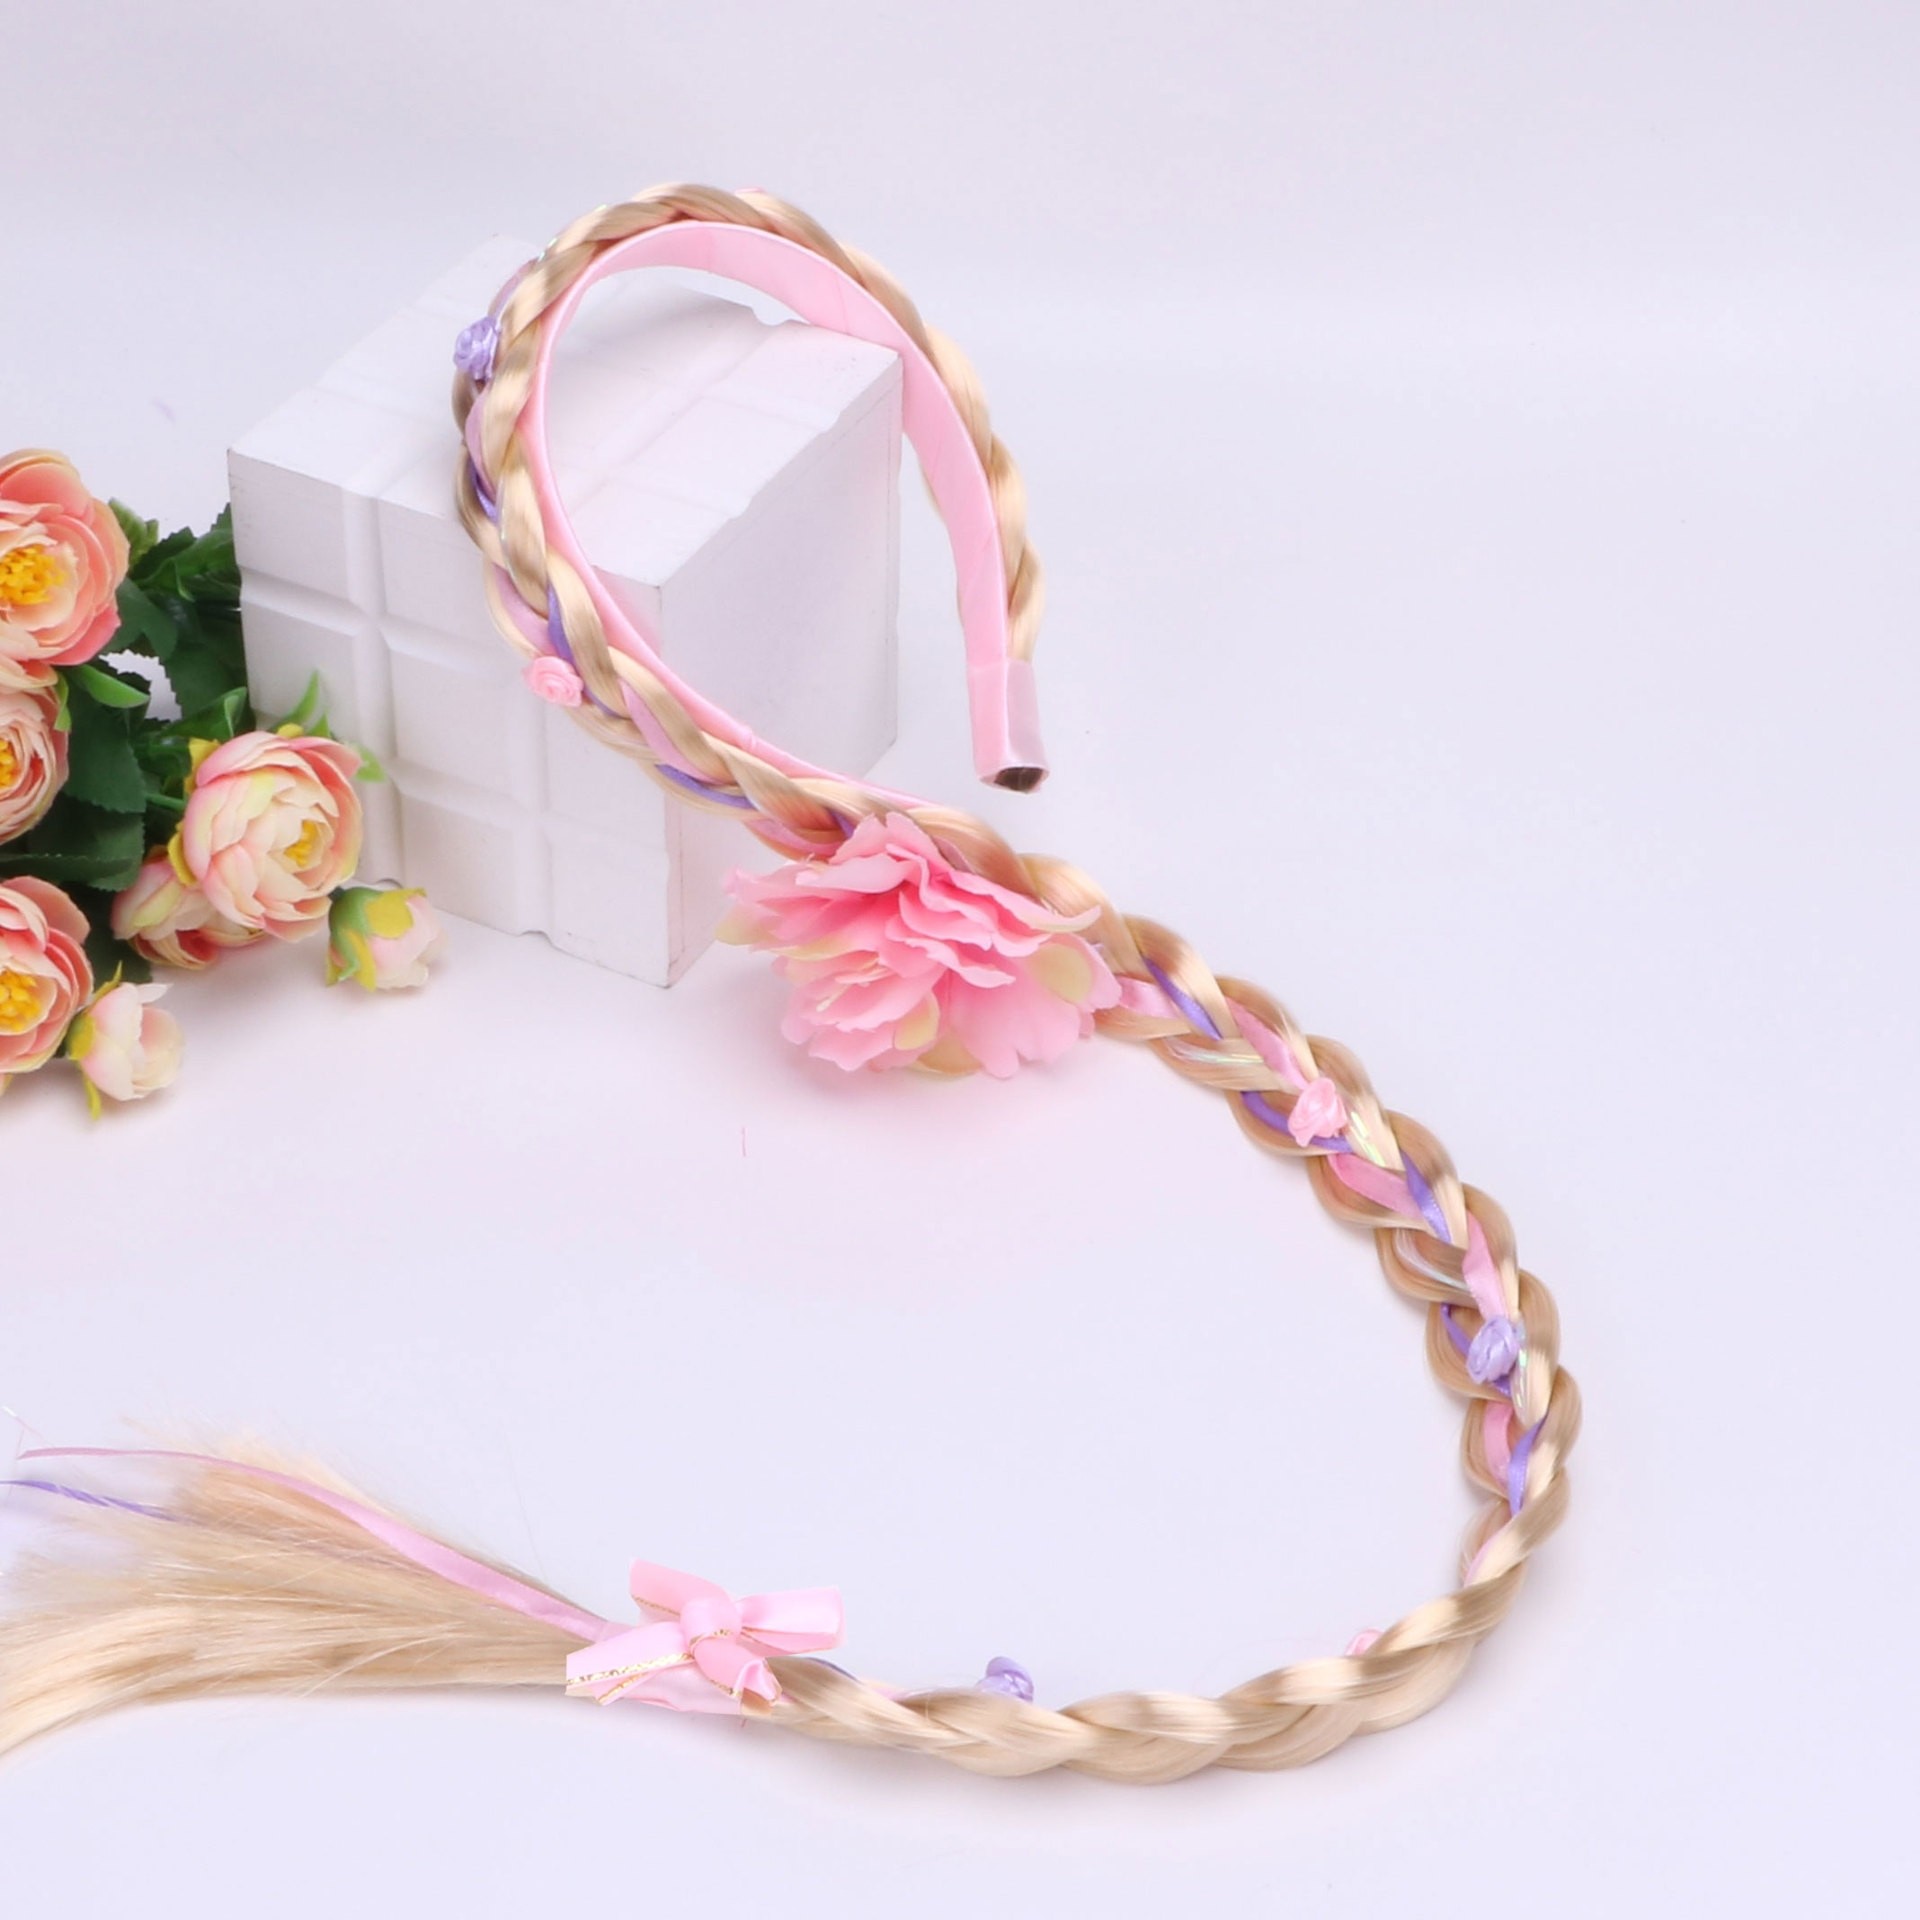 Princess Rapunzel Long Braided Wig Headbands with Tiara Flowers Adorn for Girls Costume Accessories Dress Up Birthday Party 